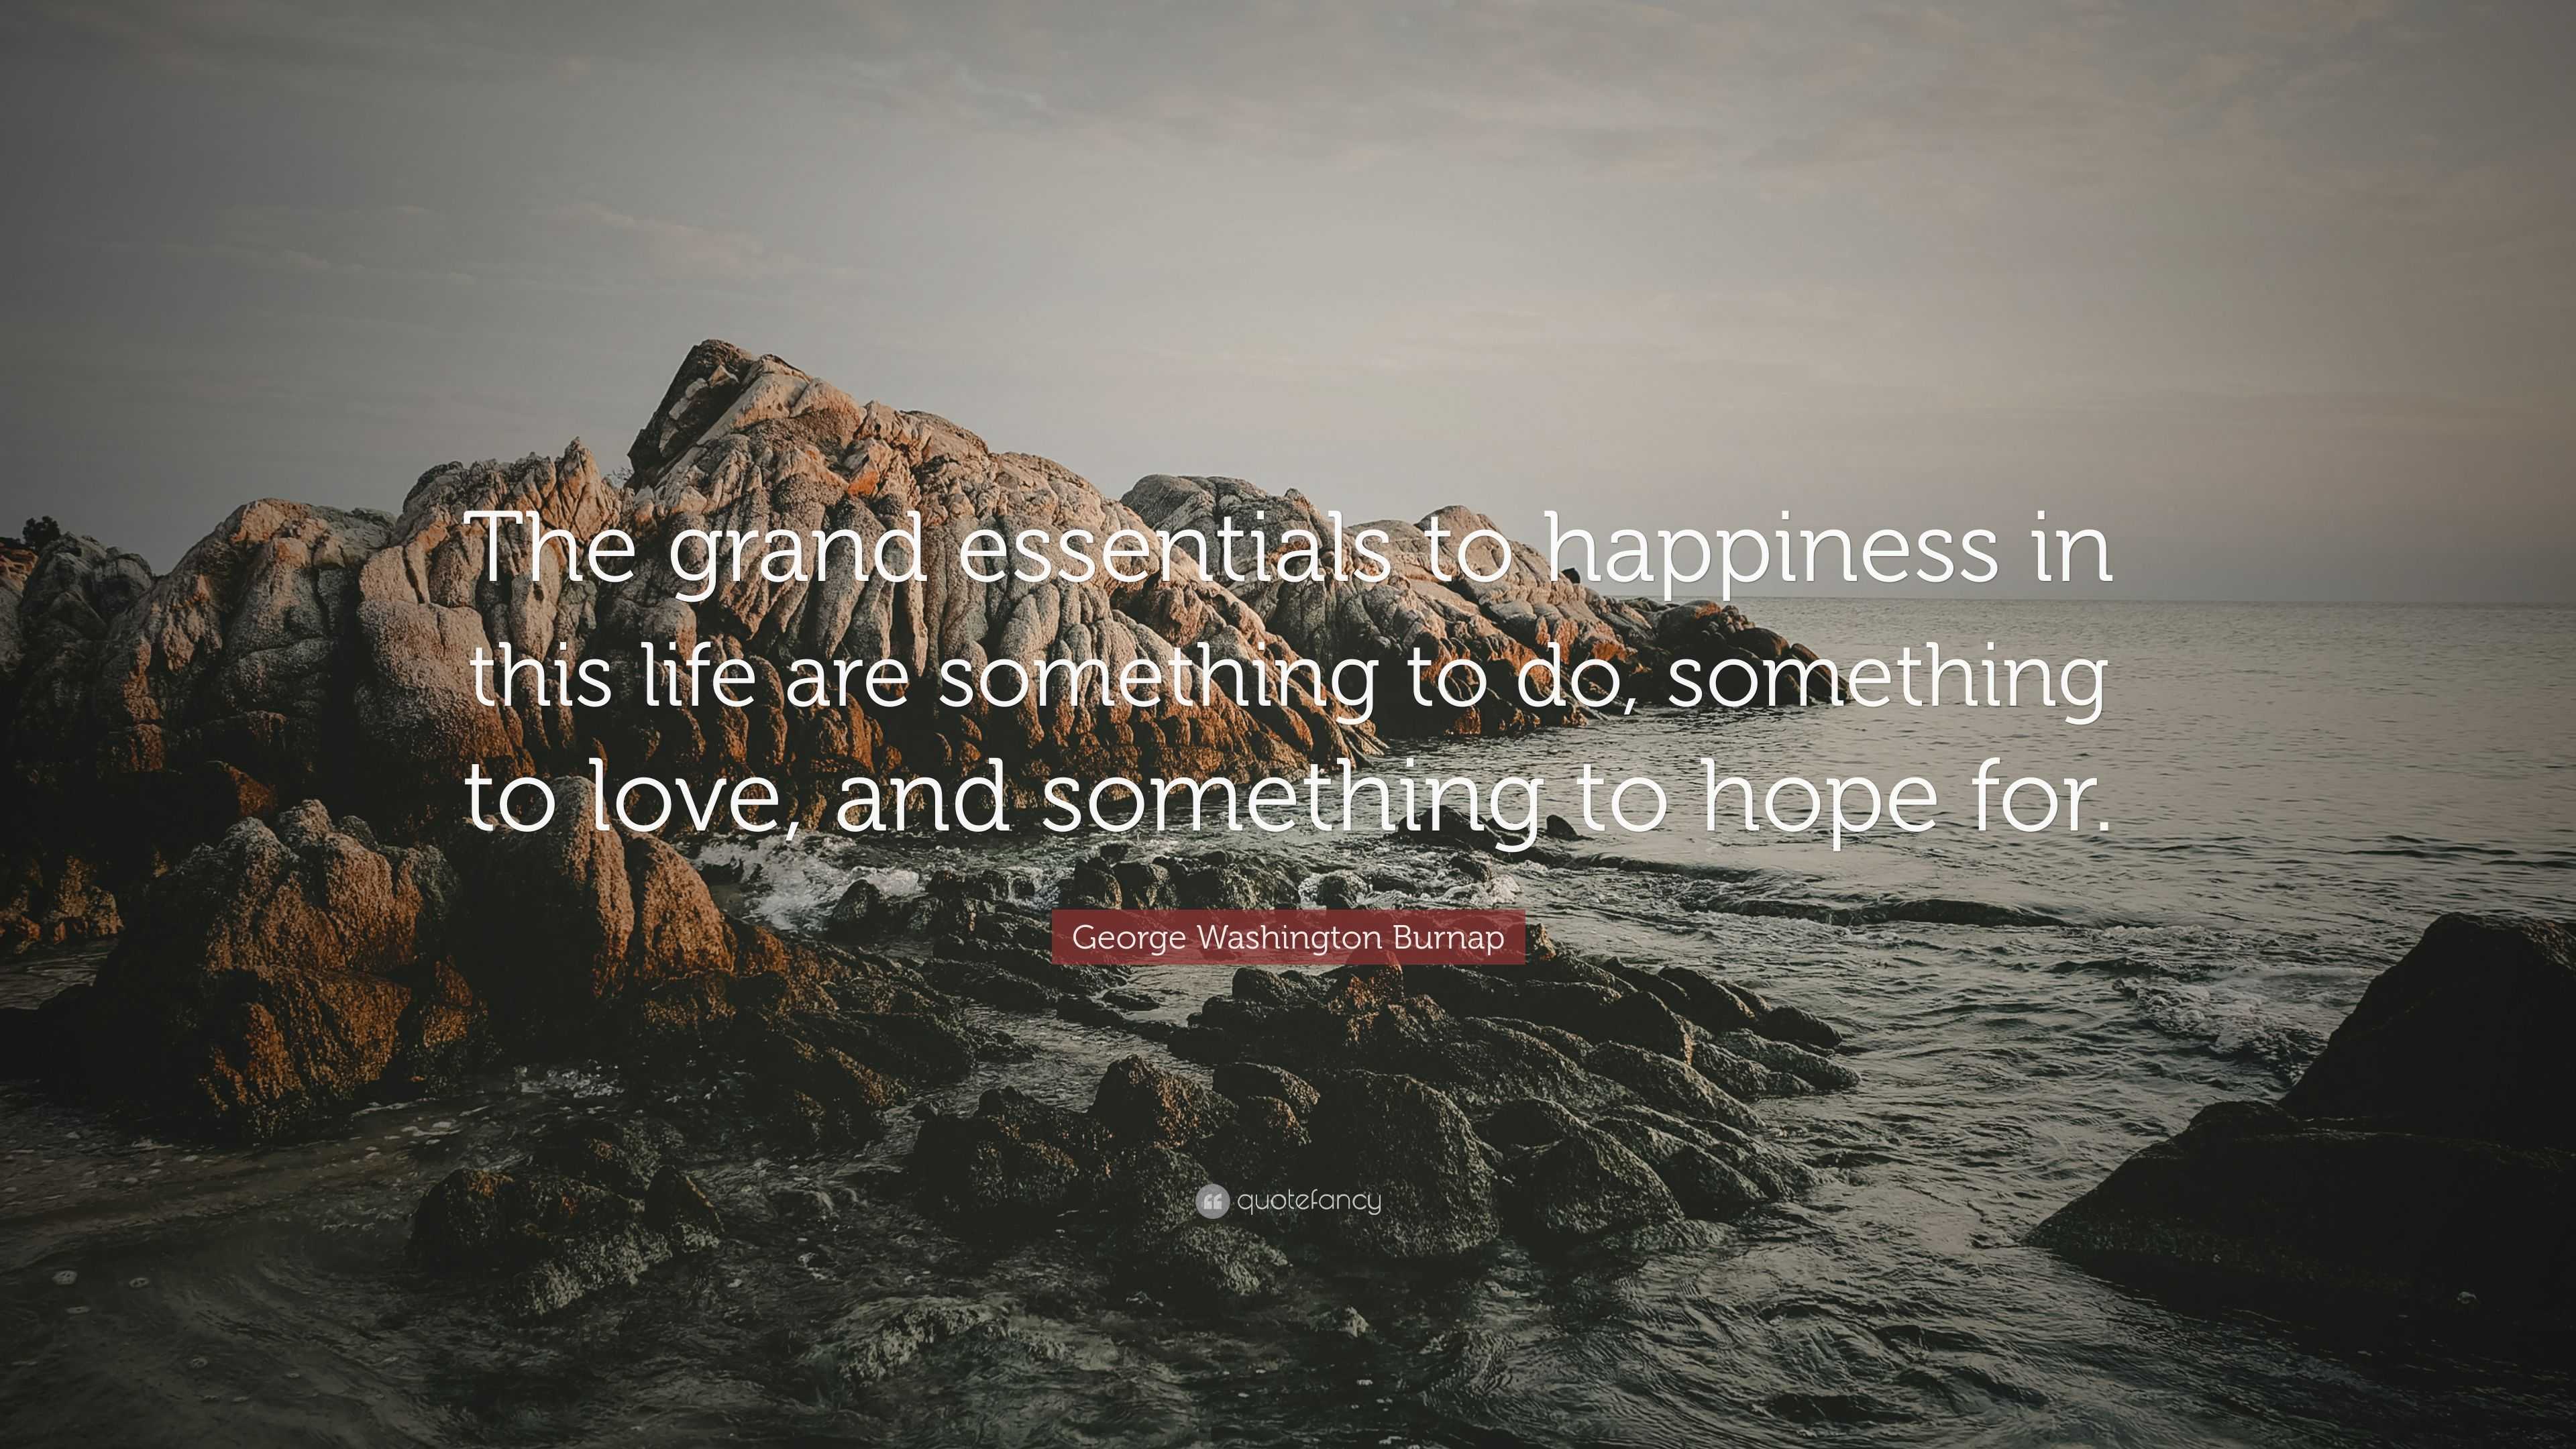 George Washington Burnap Quote: “The grand essentials to happiness in ...